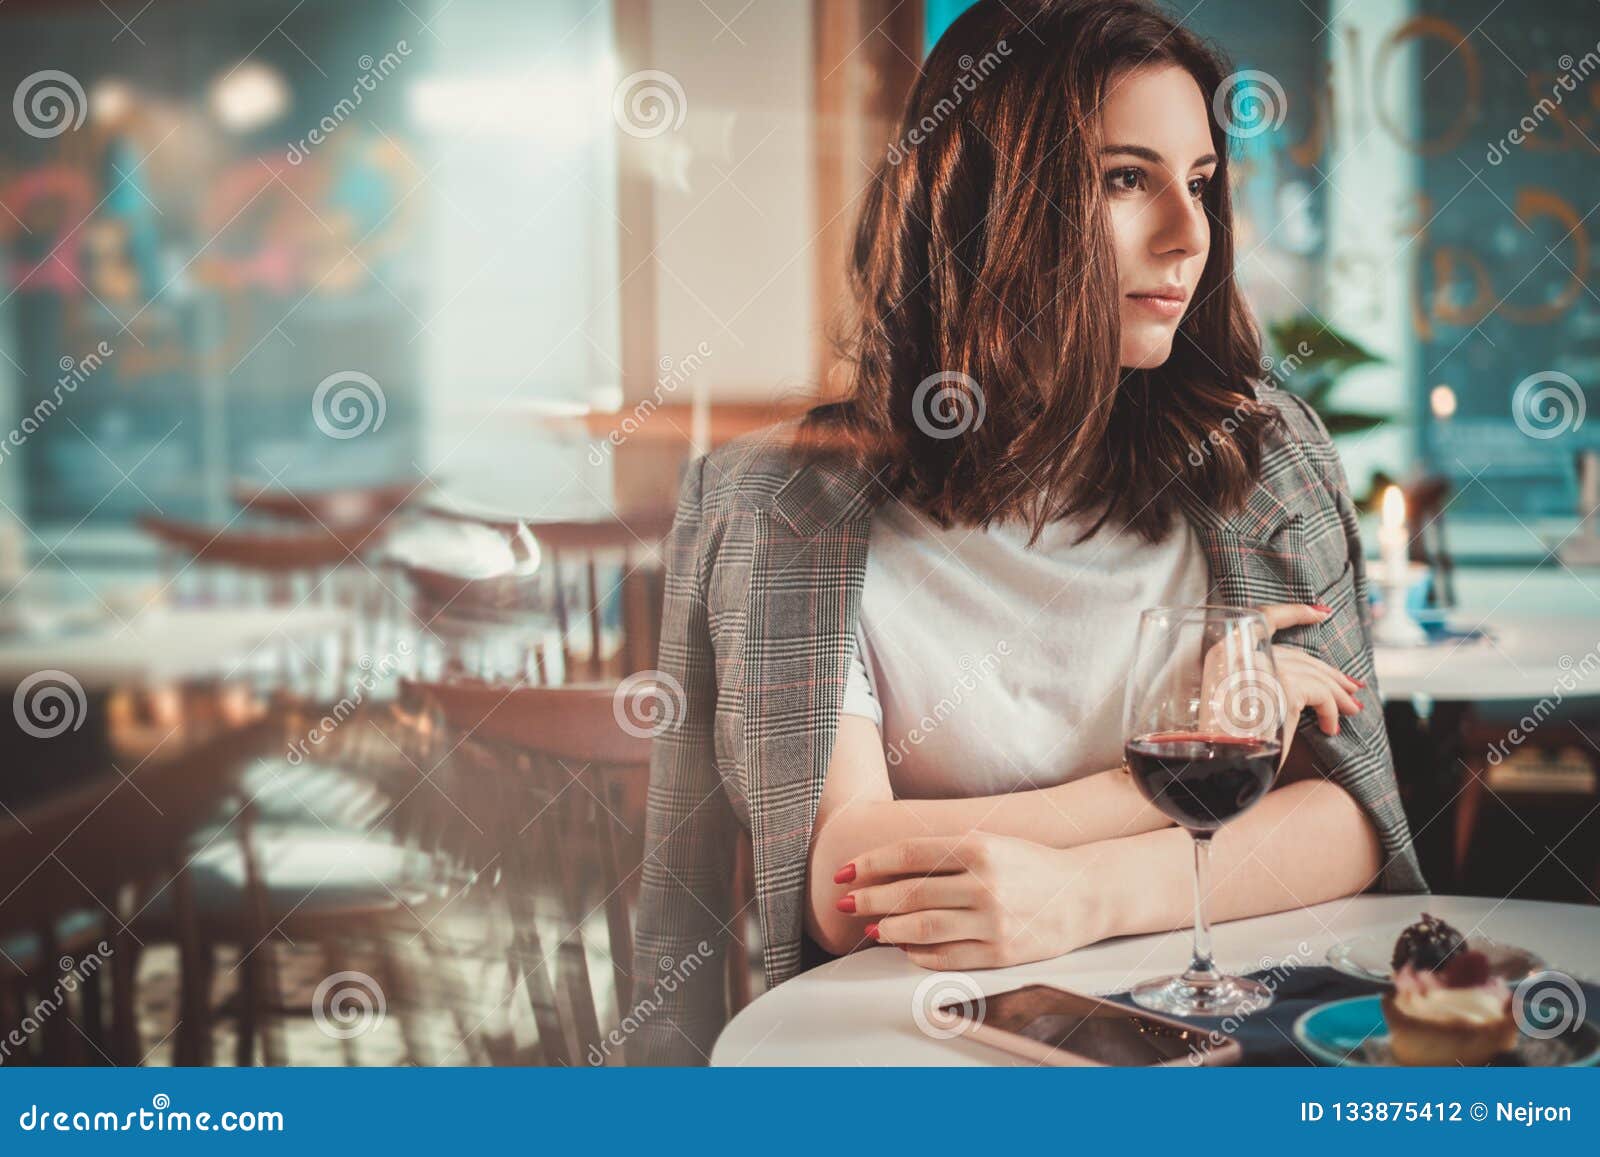 Beautiful Woman Sitting at the Restaurant Stock Photo - Image of girl